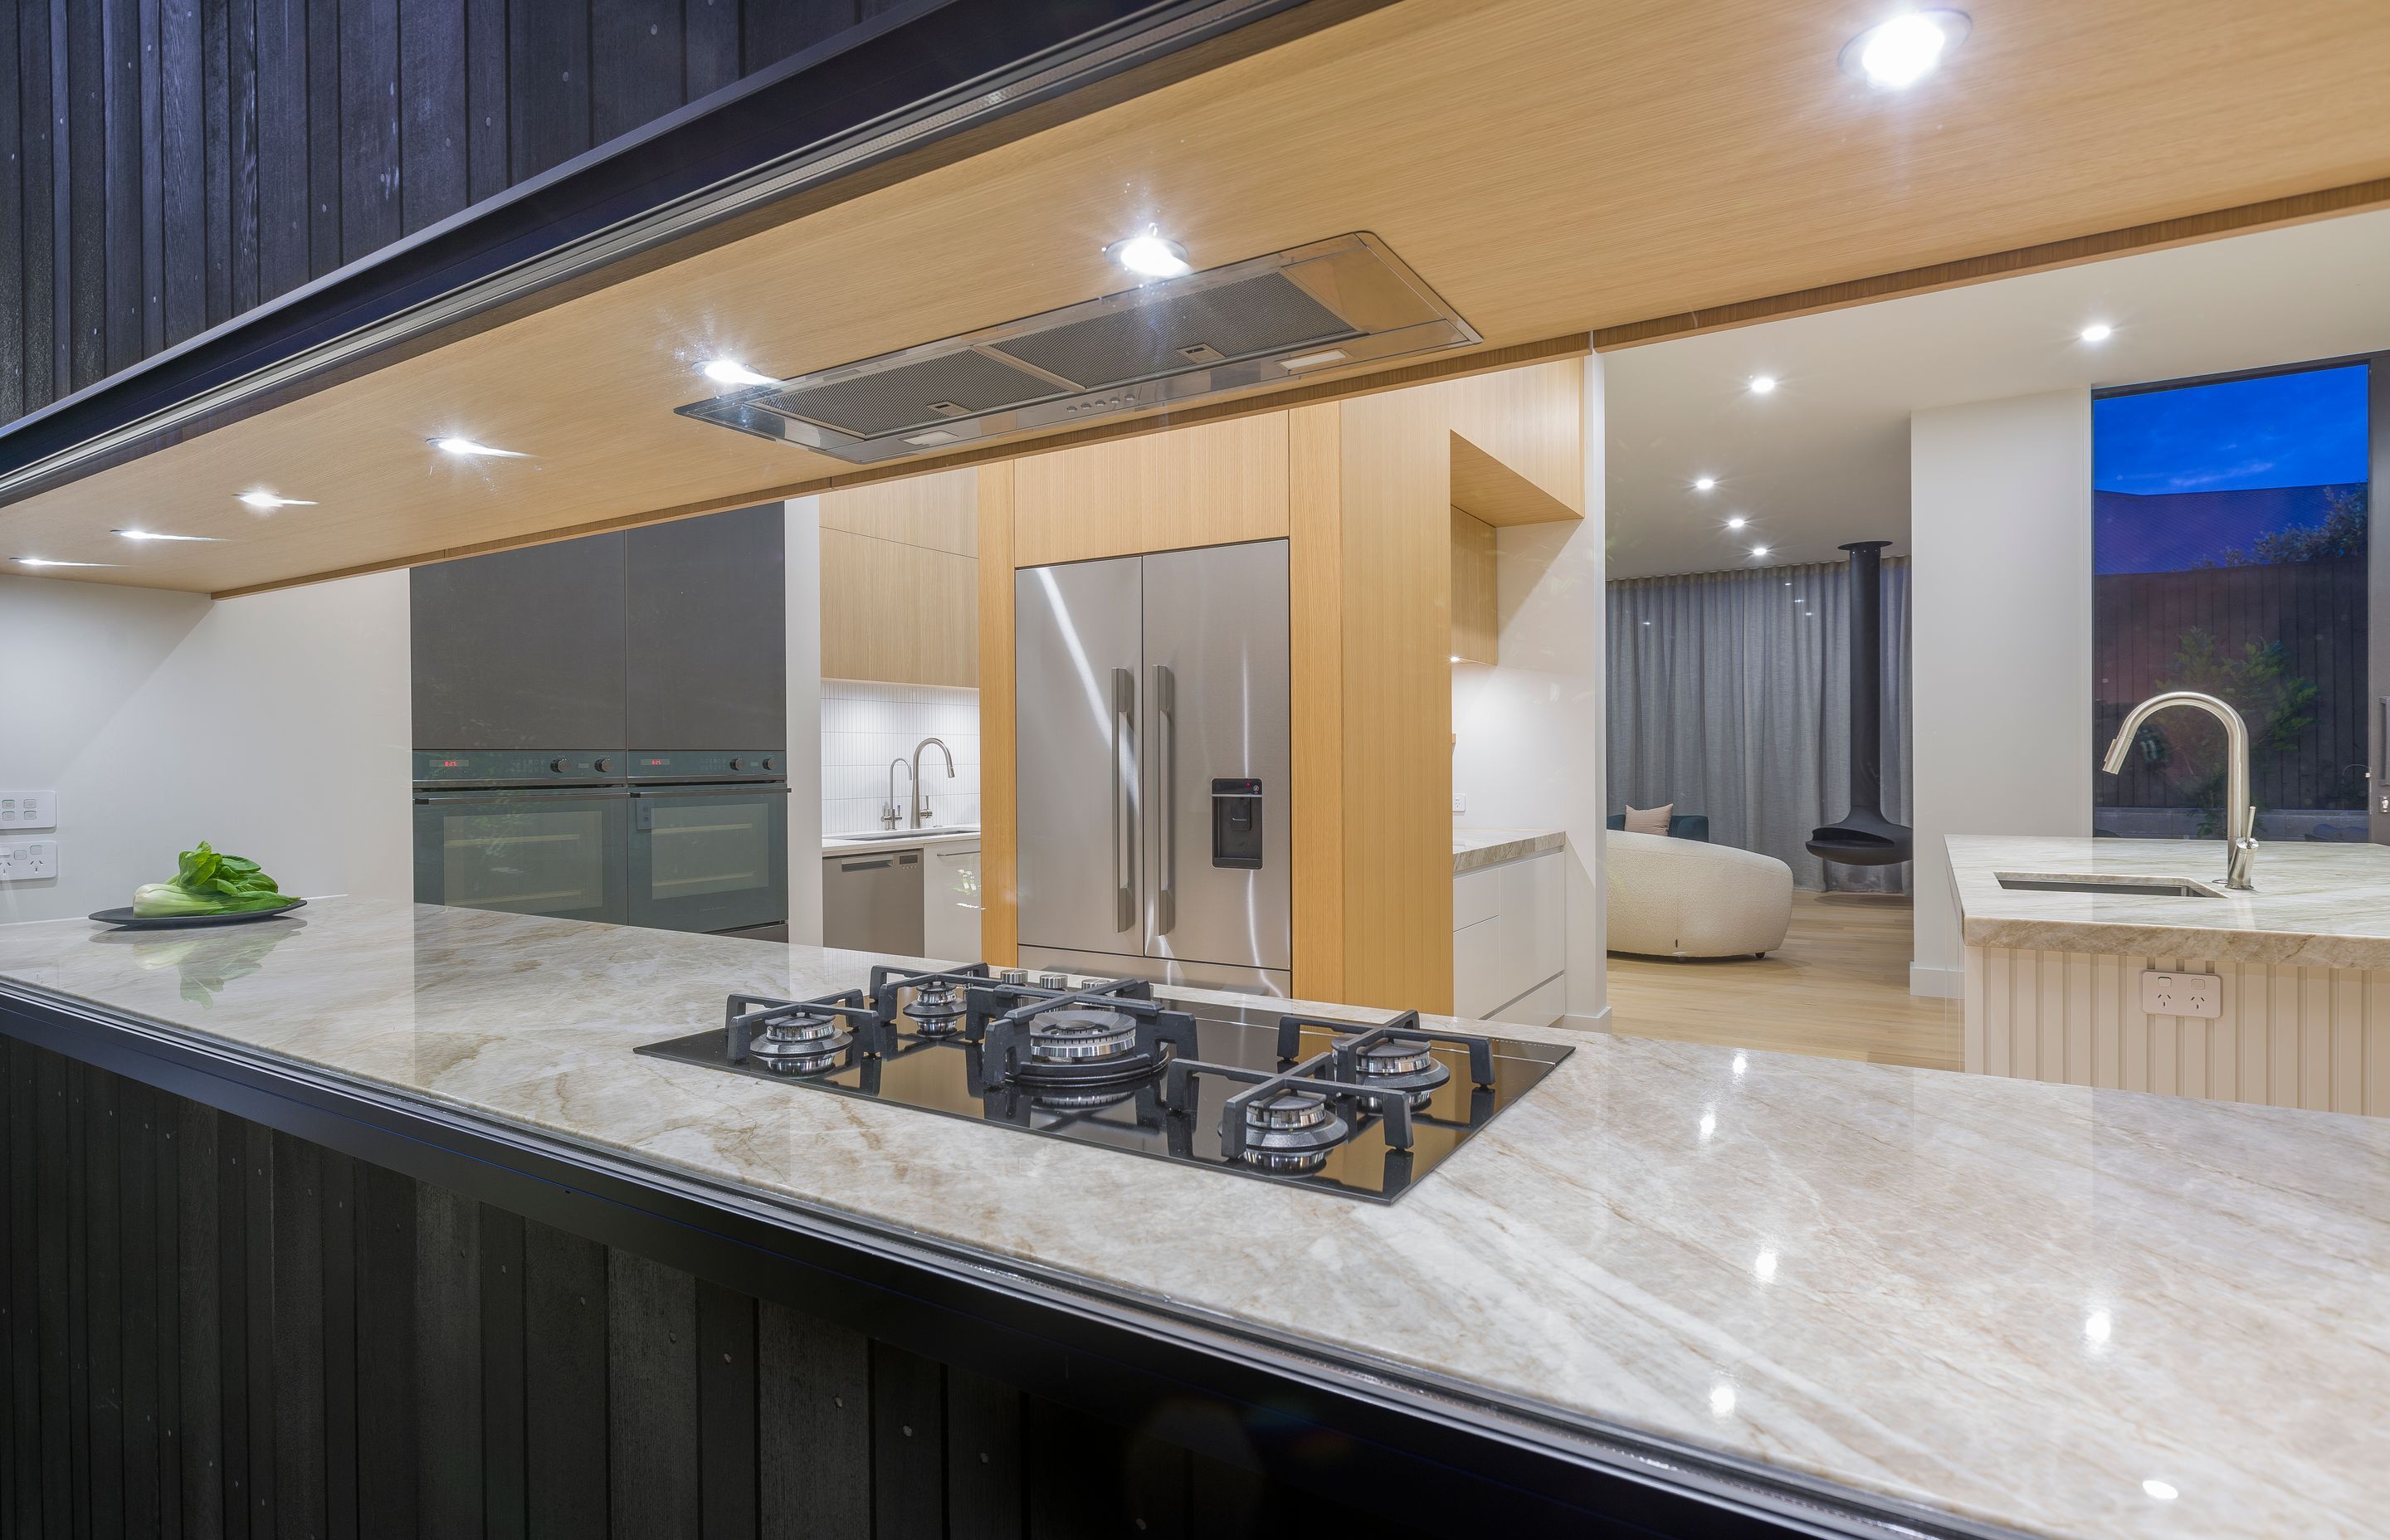 This view from outside reveals the scullery beyond and the attention to fine detailing of each material to the glass frame; a careful collaboration of several trades at site.  Wanting appliances hidden yet intuitively accessible, we tucked the fridge and 